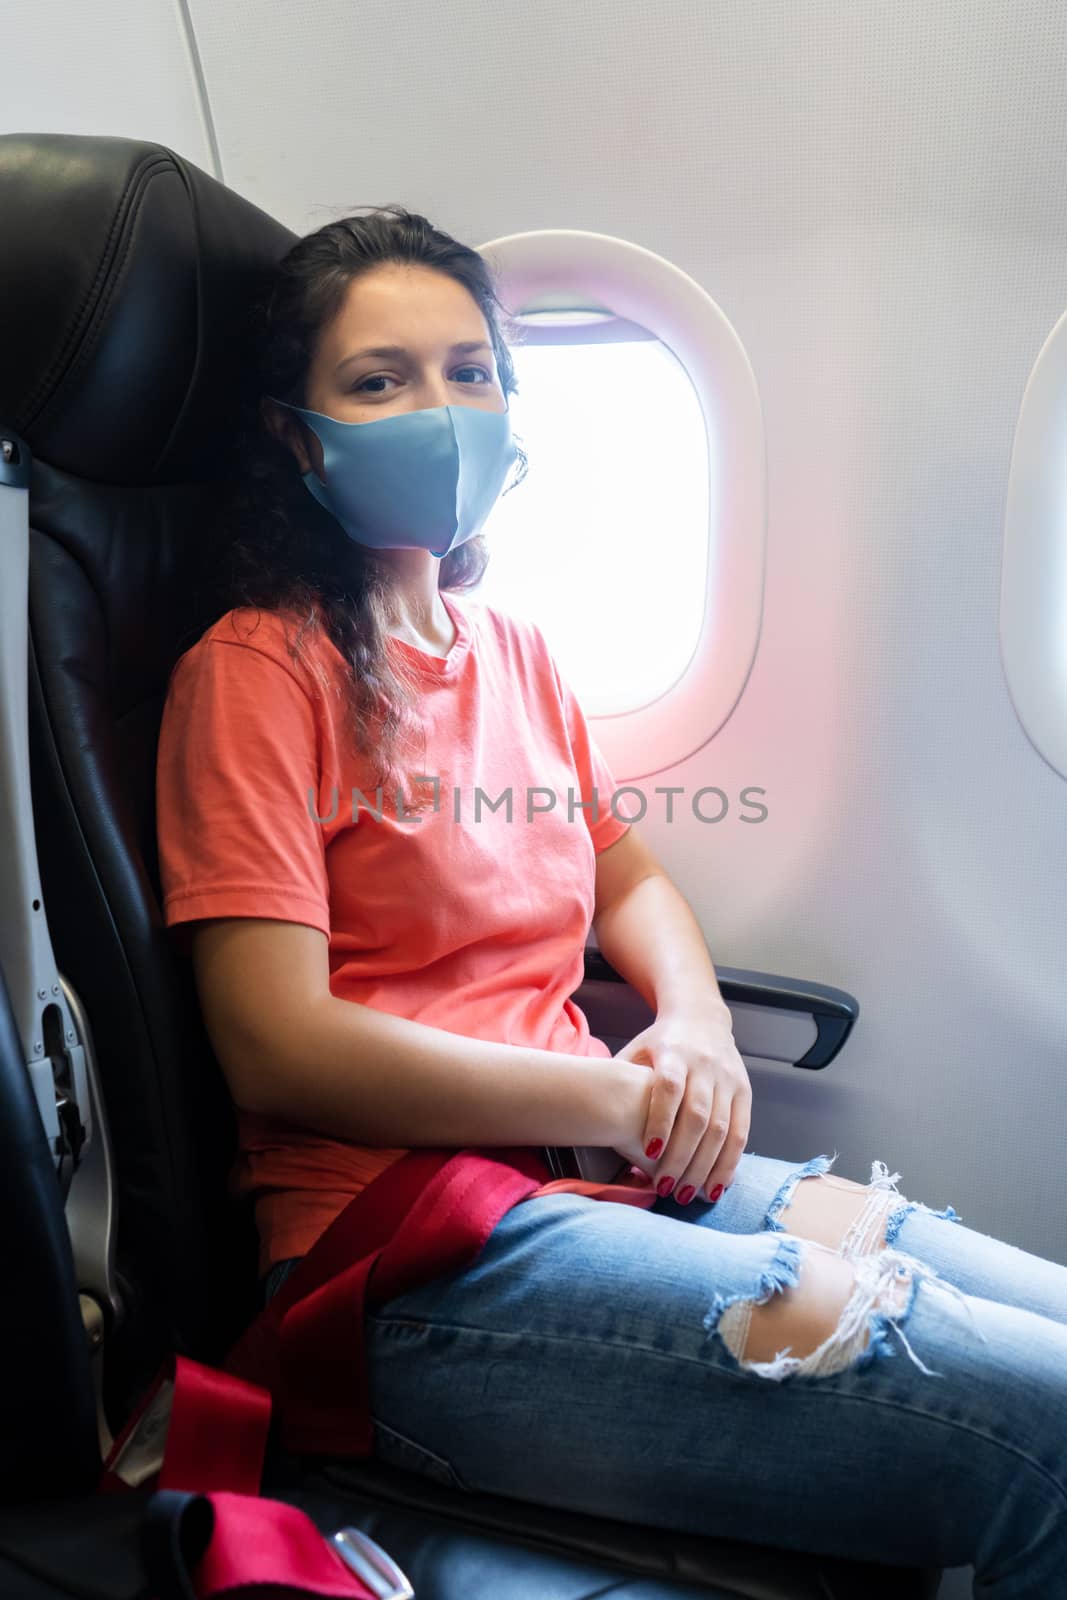 A girl in a medical mask on her face during a flight in the cabi by Try_my_best